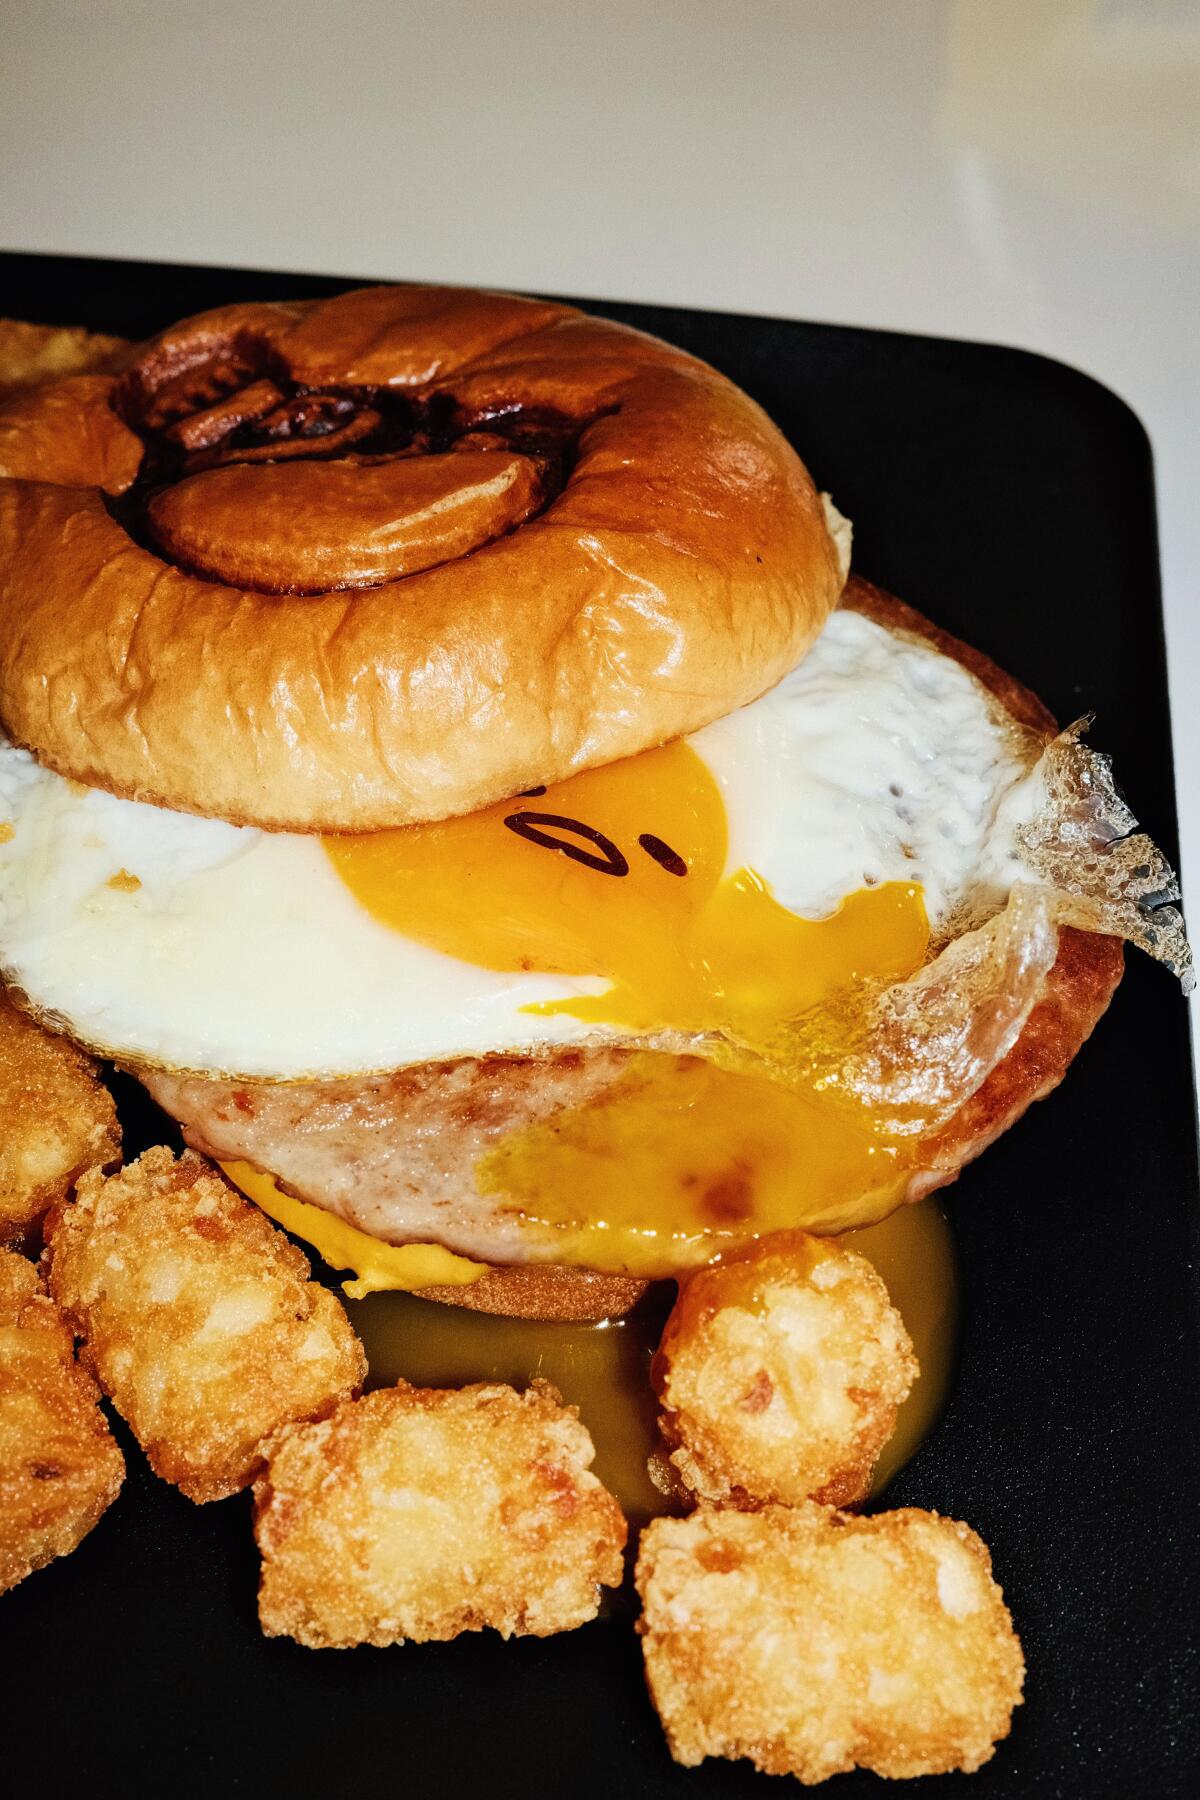 A close-up of an oozing yolk on an egg-covered sausage sandwich with tots at Cafe Gudetama in Buena Park.